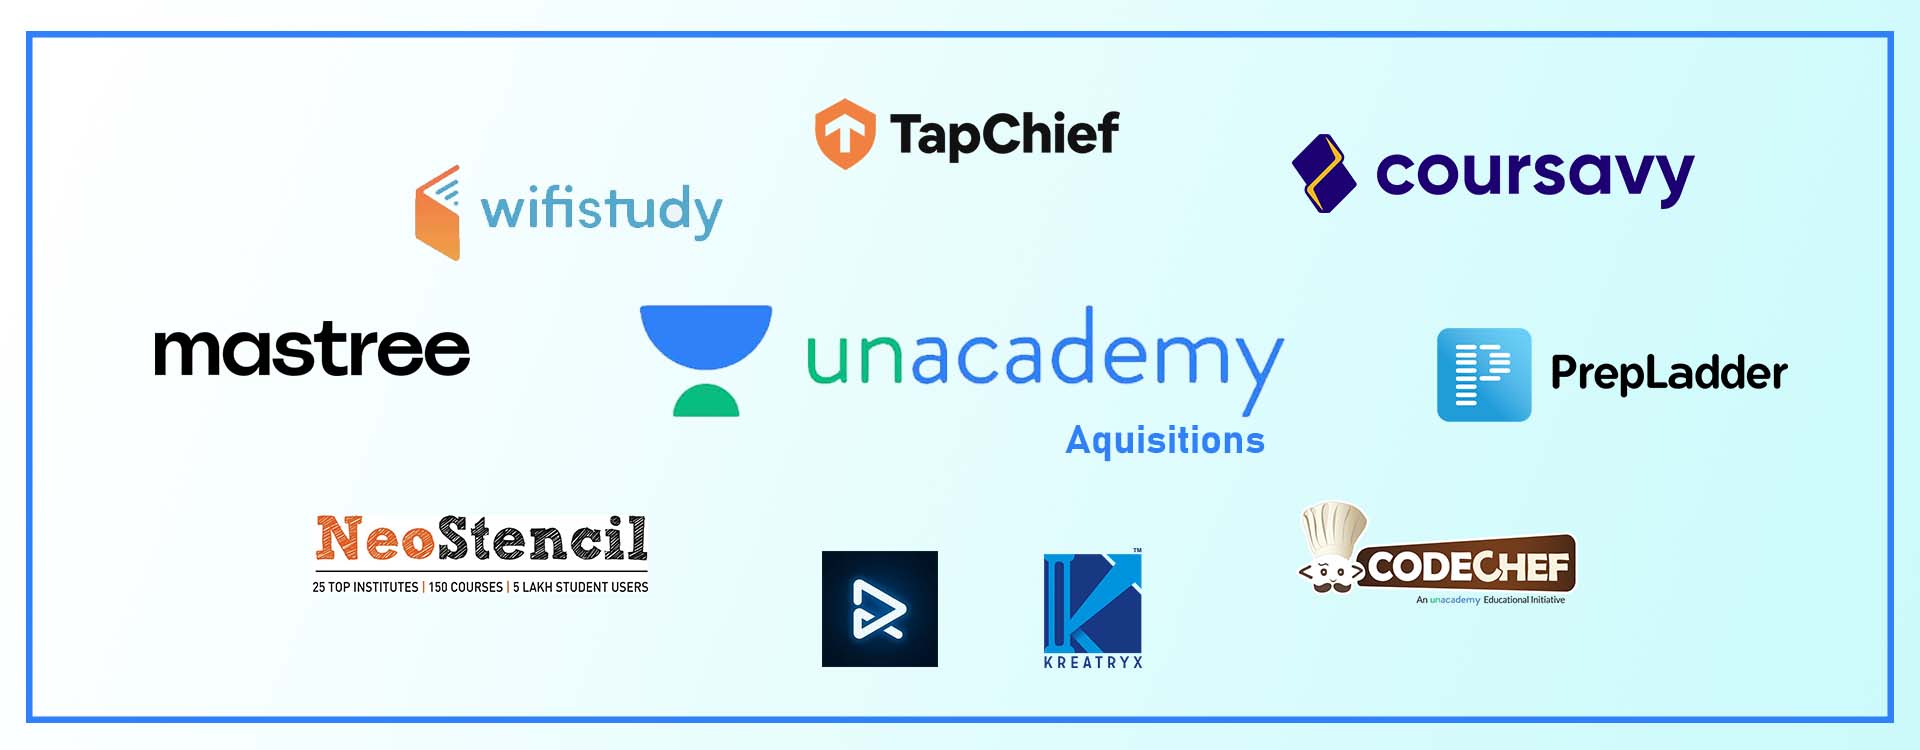 Unacademy has swiftly made 8 acquisitions within 16 months.